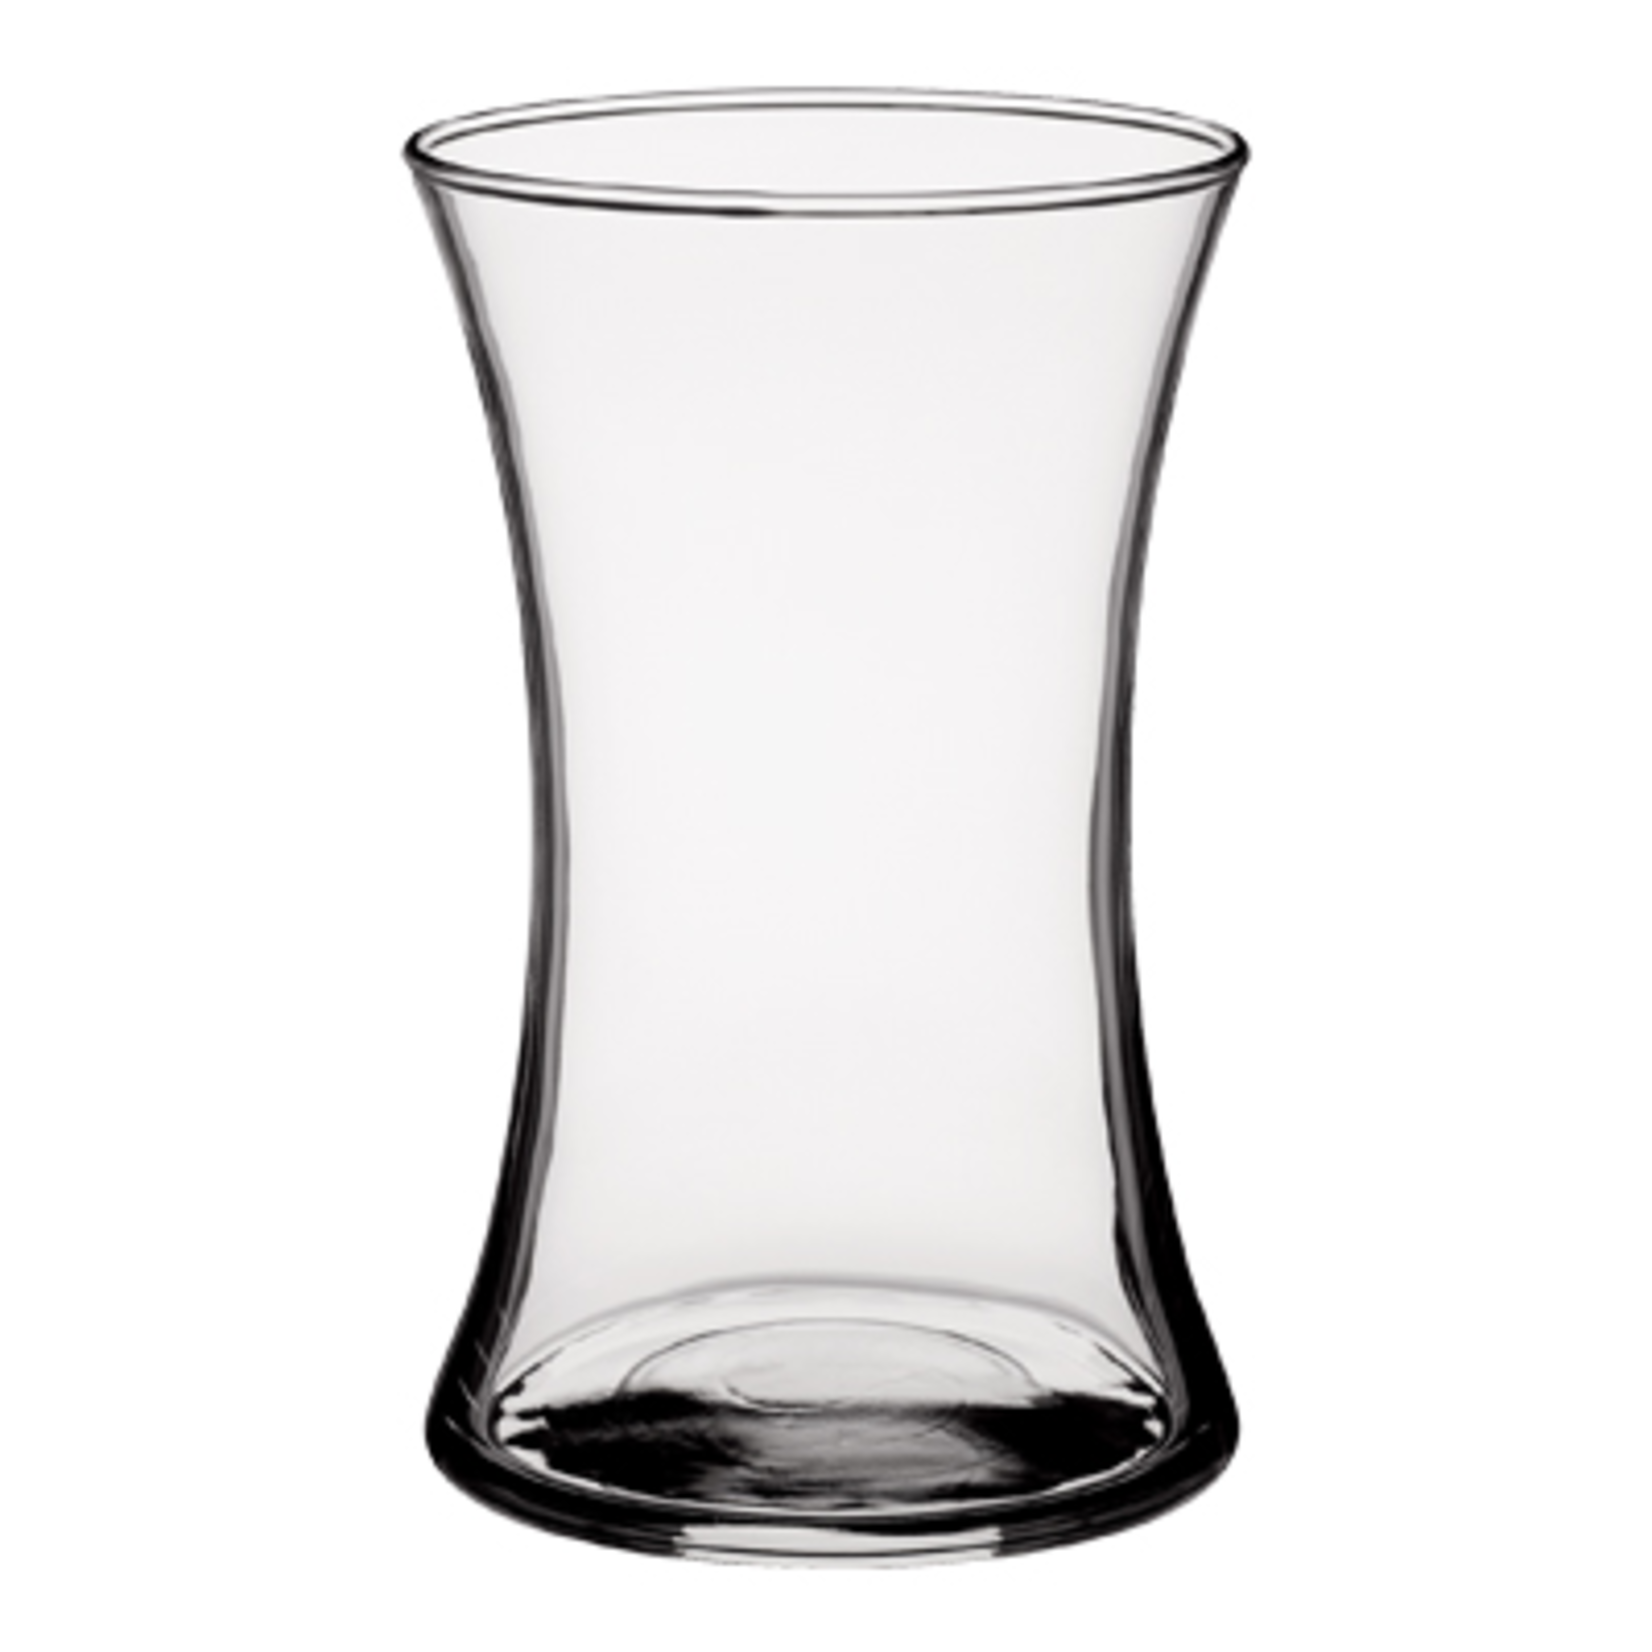 8”H X 4.75” CLEAR GLASS GATHERING VASE